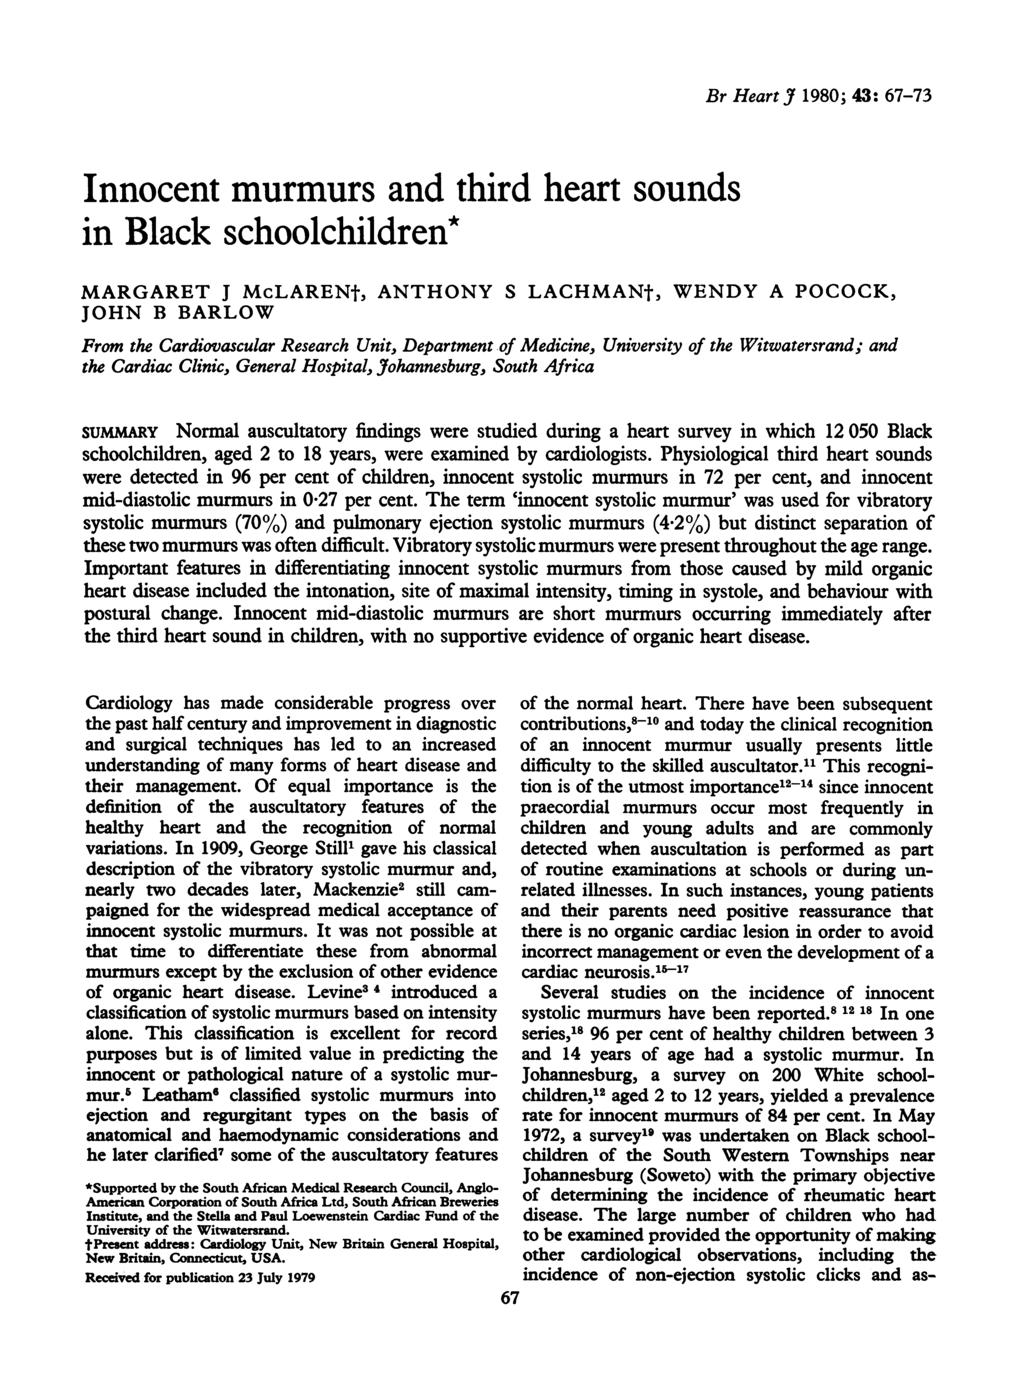 Innocent murmurs and third heart sounds in Black schoolchildren* Br Heart J 198; 43: 67-73 MRGRET J McLRENt, NTHONY S LCHMNt, WENDY POCOCK, JOHN B BRLOW From the Cardiovascular Research Unit,